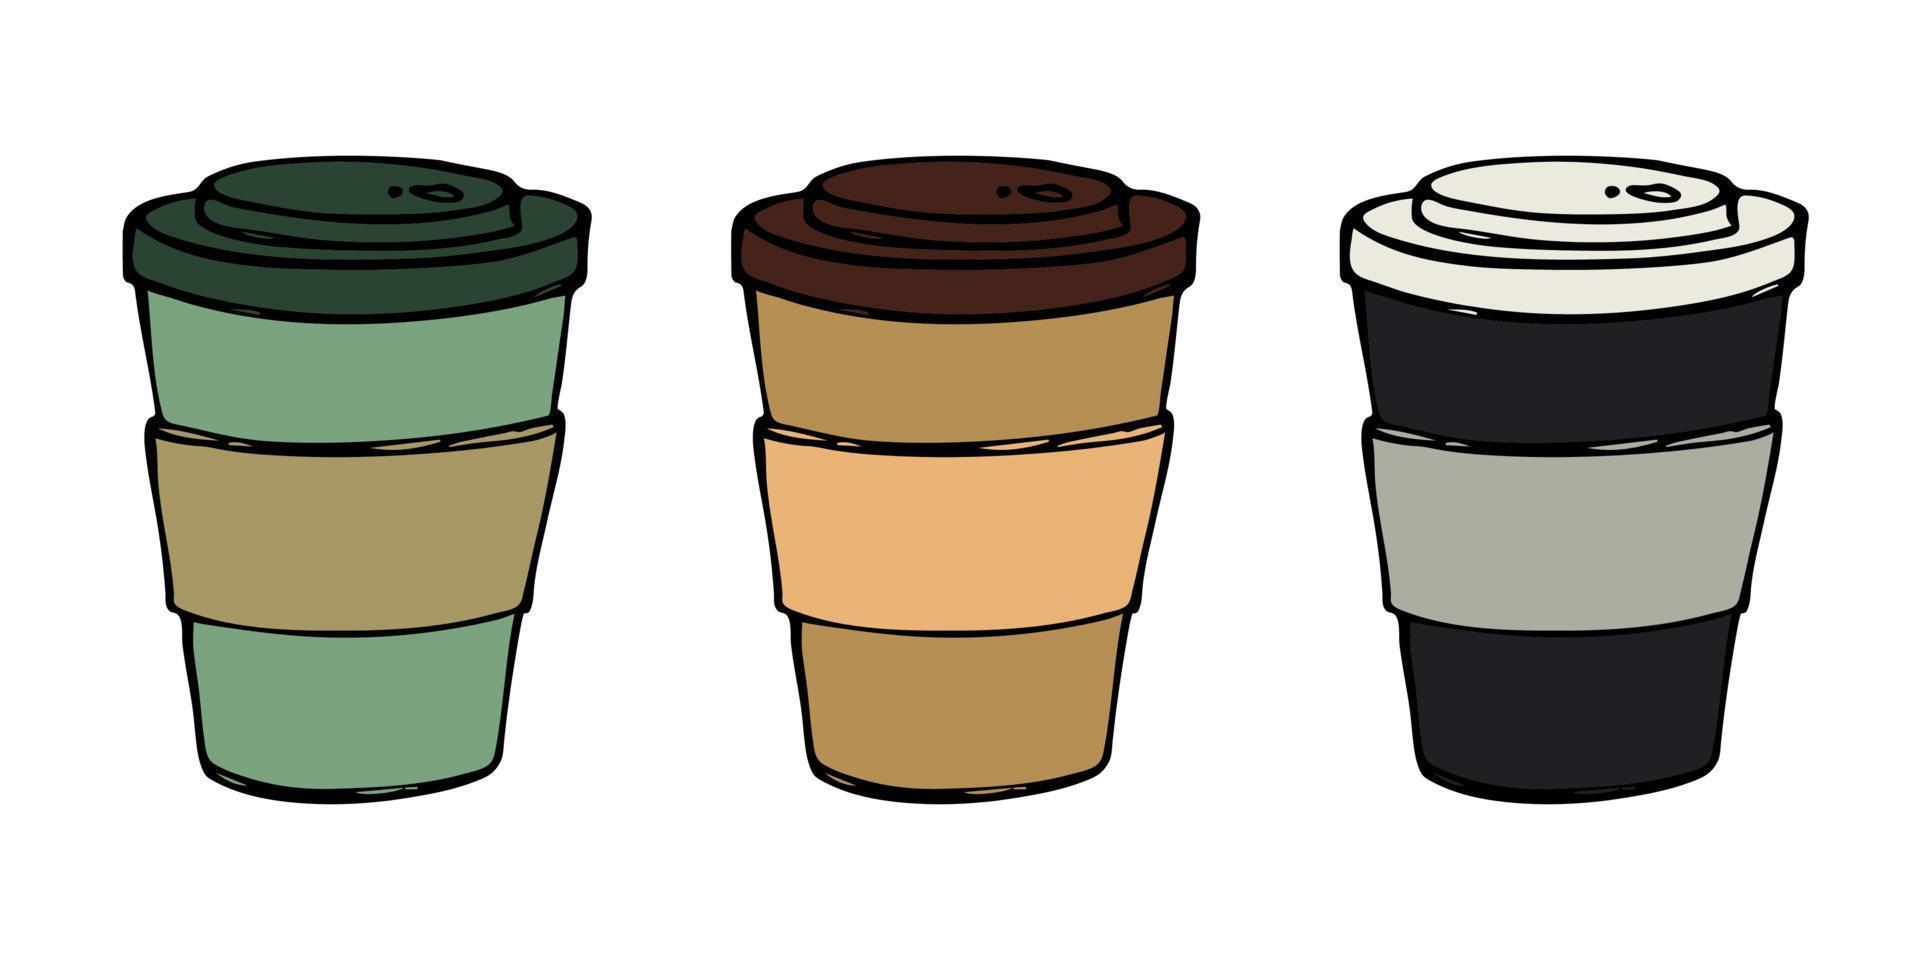 Cute cup of tea or coffee illustration. Simple cup clipart. Cozy home doodle set vector